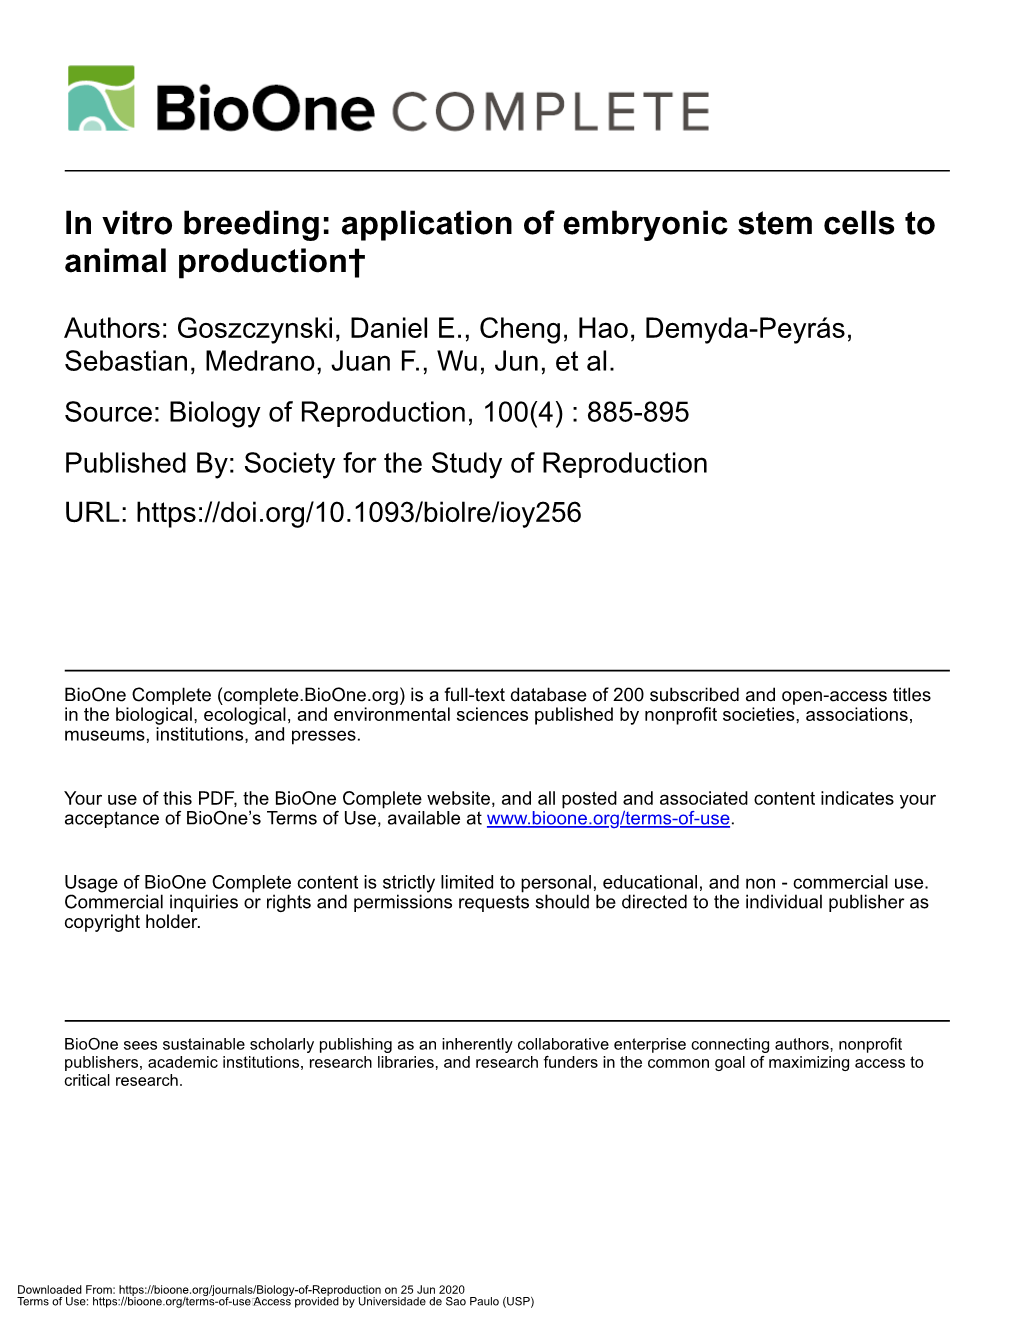 In Vitro Breeding: Application of Embryonic Stem Cells to Animal Production&Dagger;